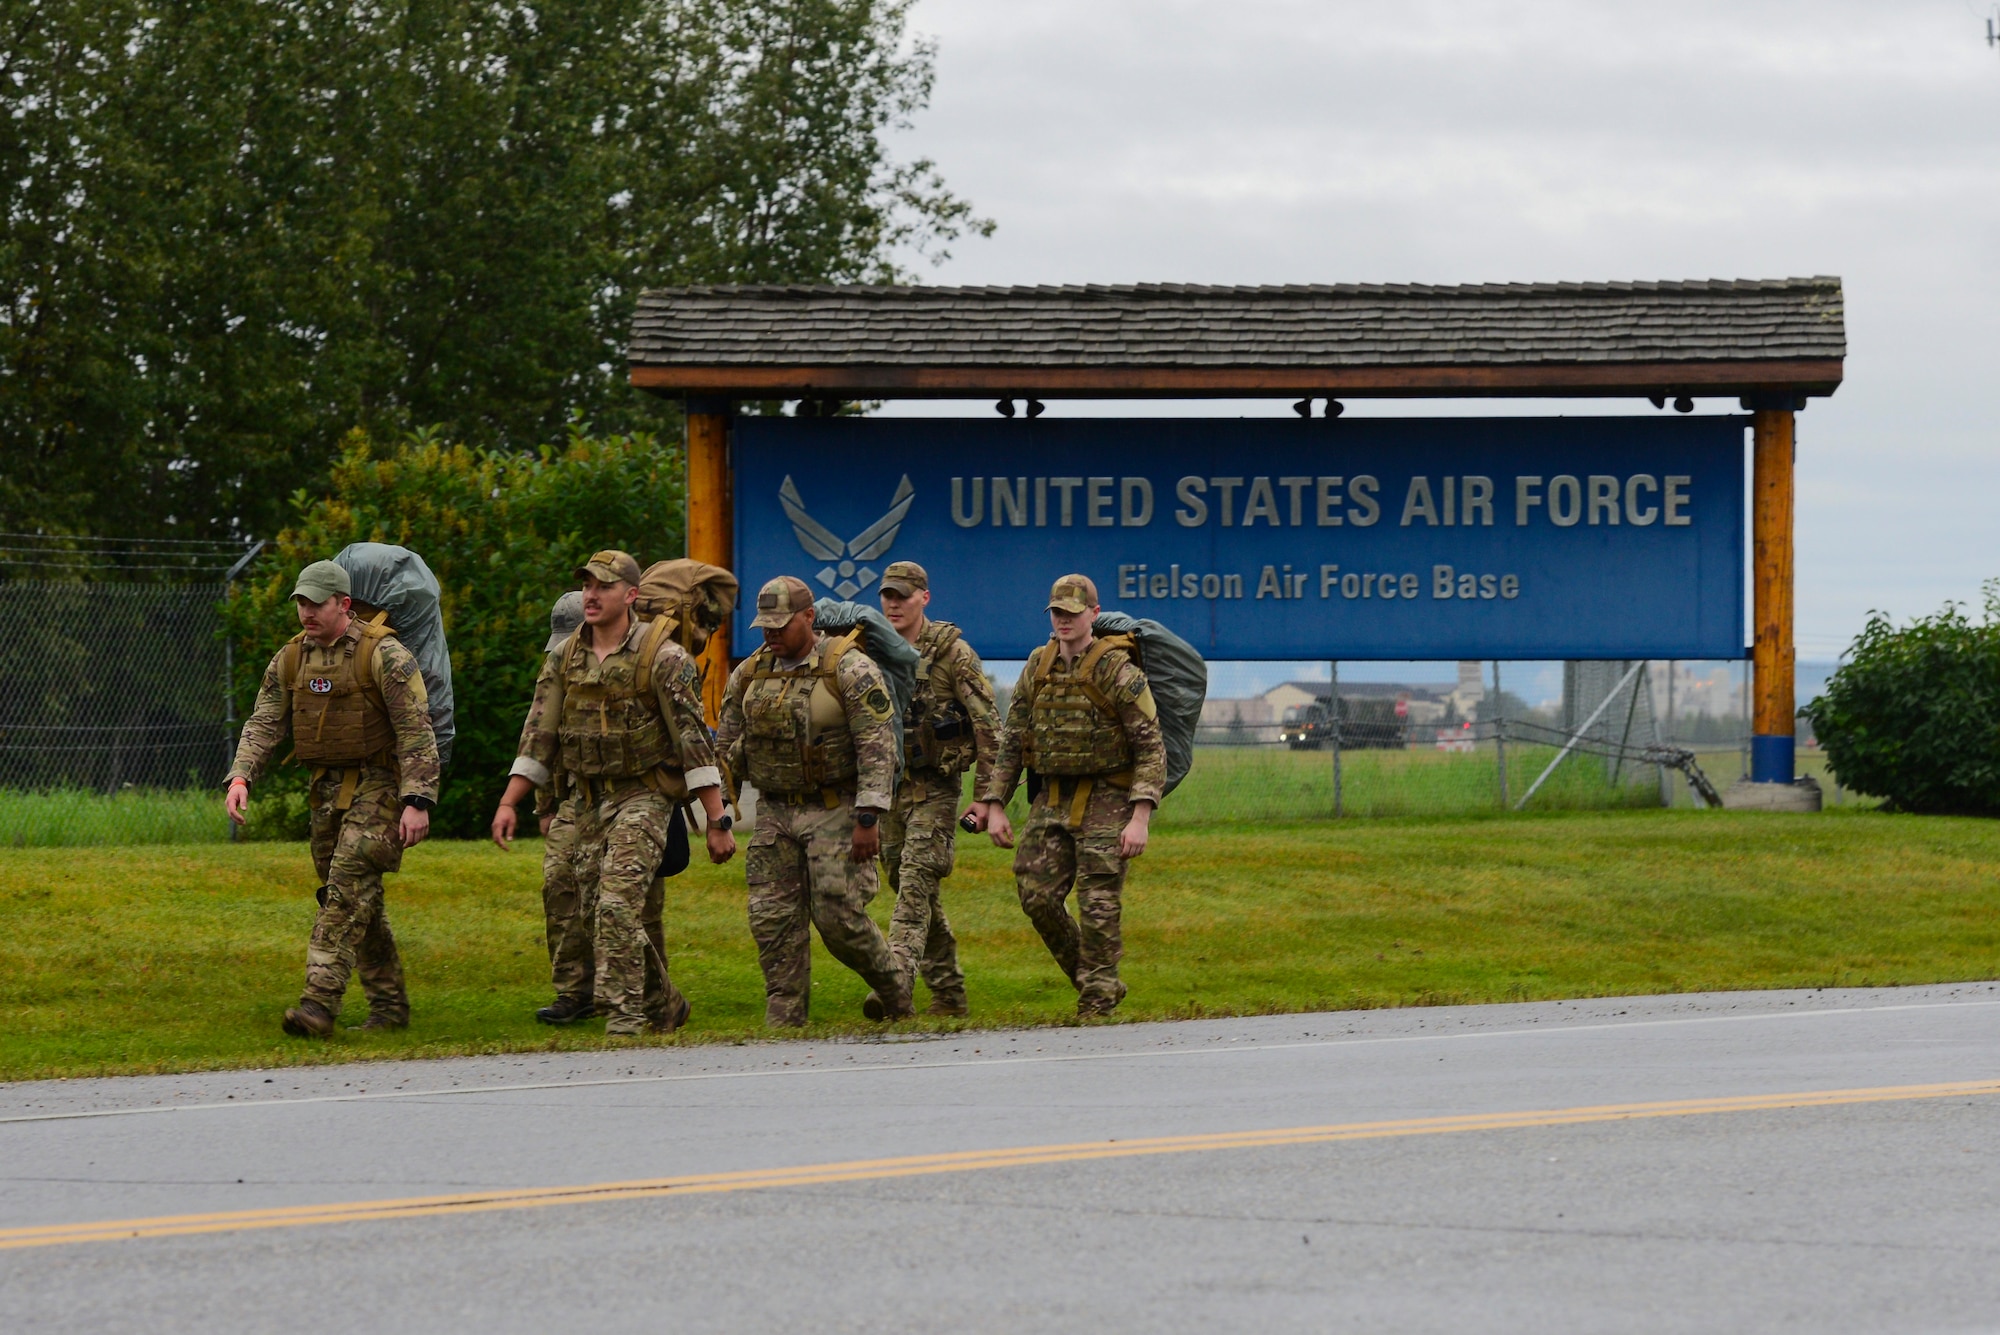 EOD members rucked an average of 30 miles a day with 220 total miles to the Arctic Circle.